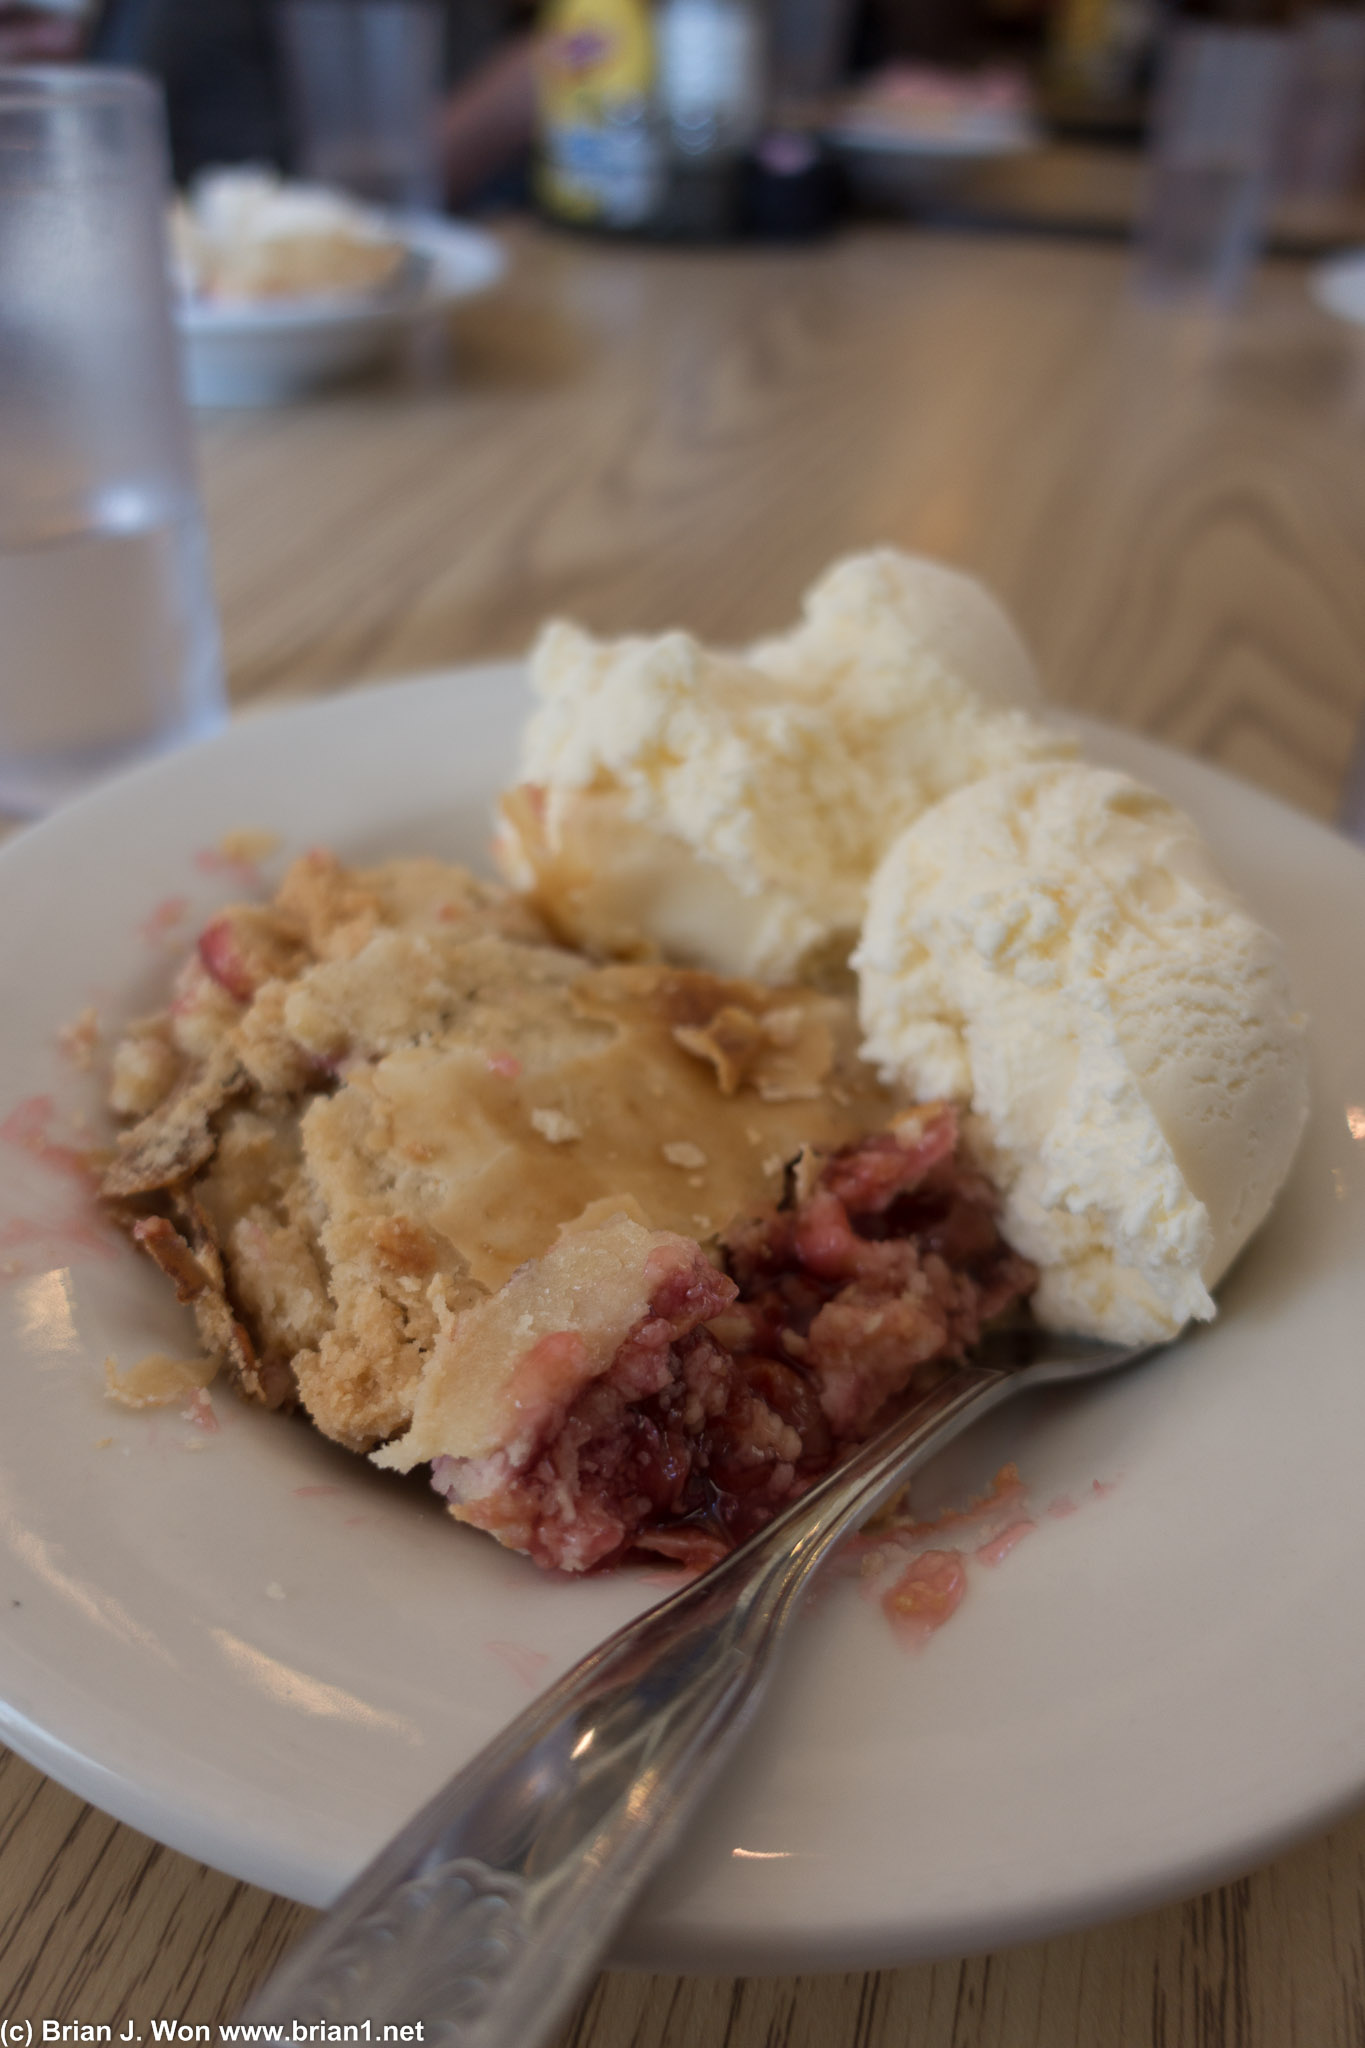 Pie (cherry, in this case) and ice cream were both way overrated.